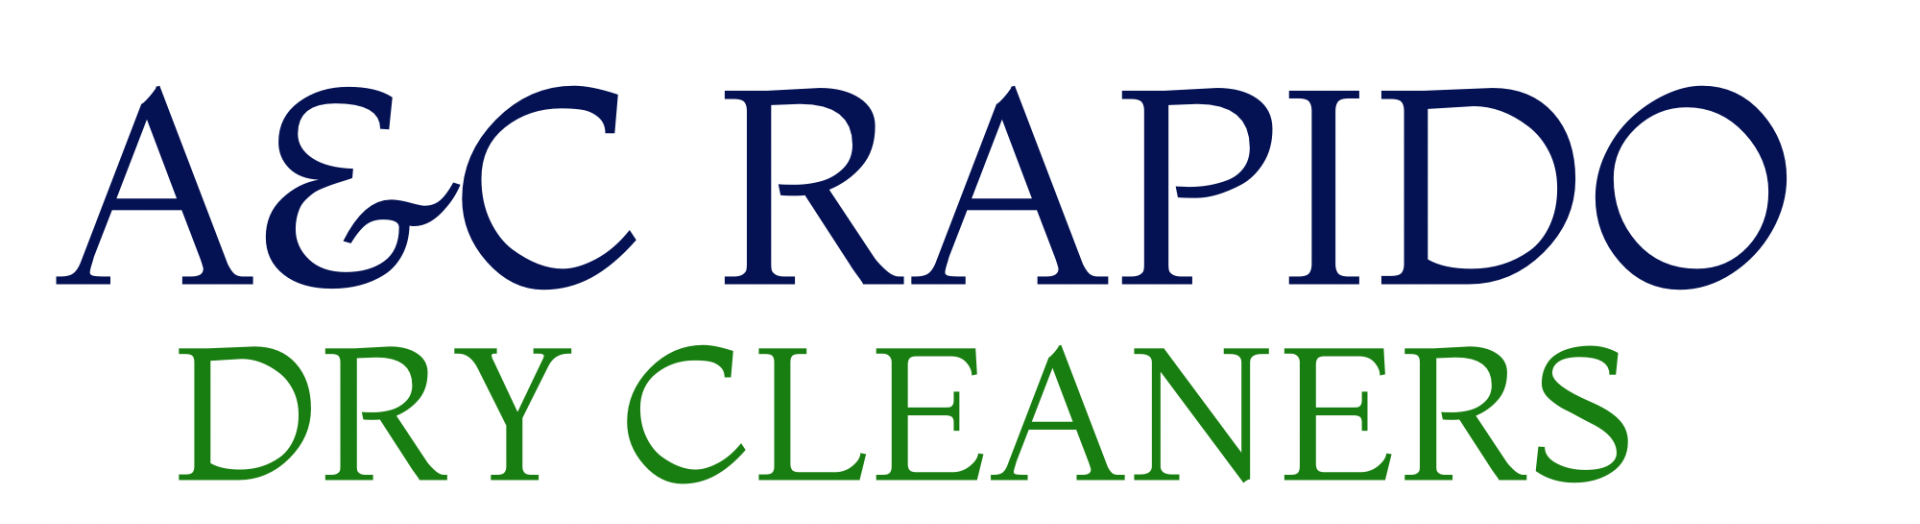 A&C Rapido Dry Cleaners Logo